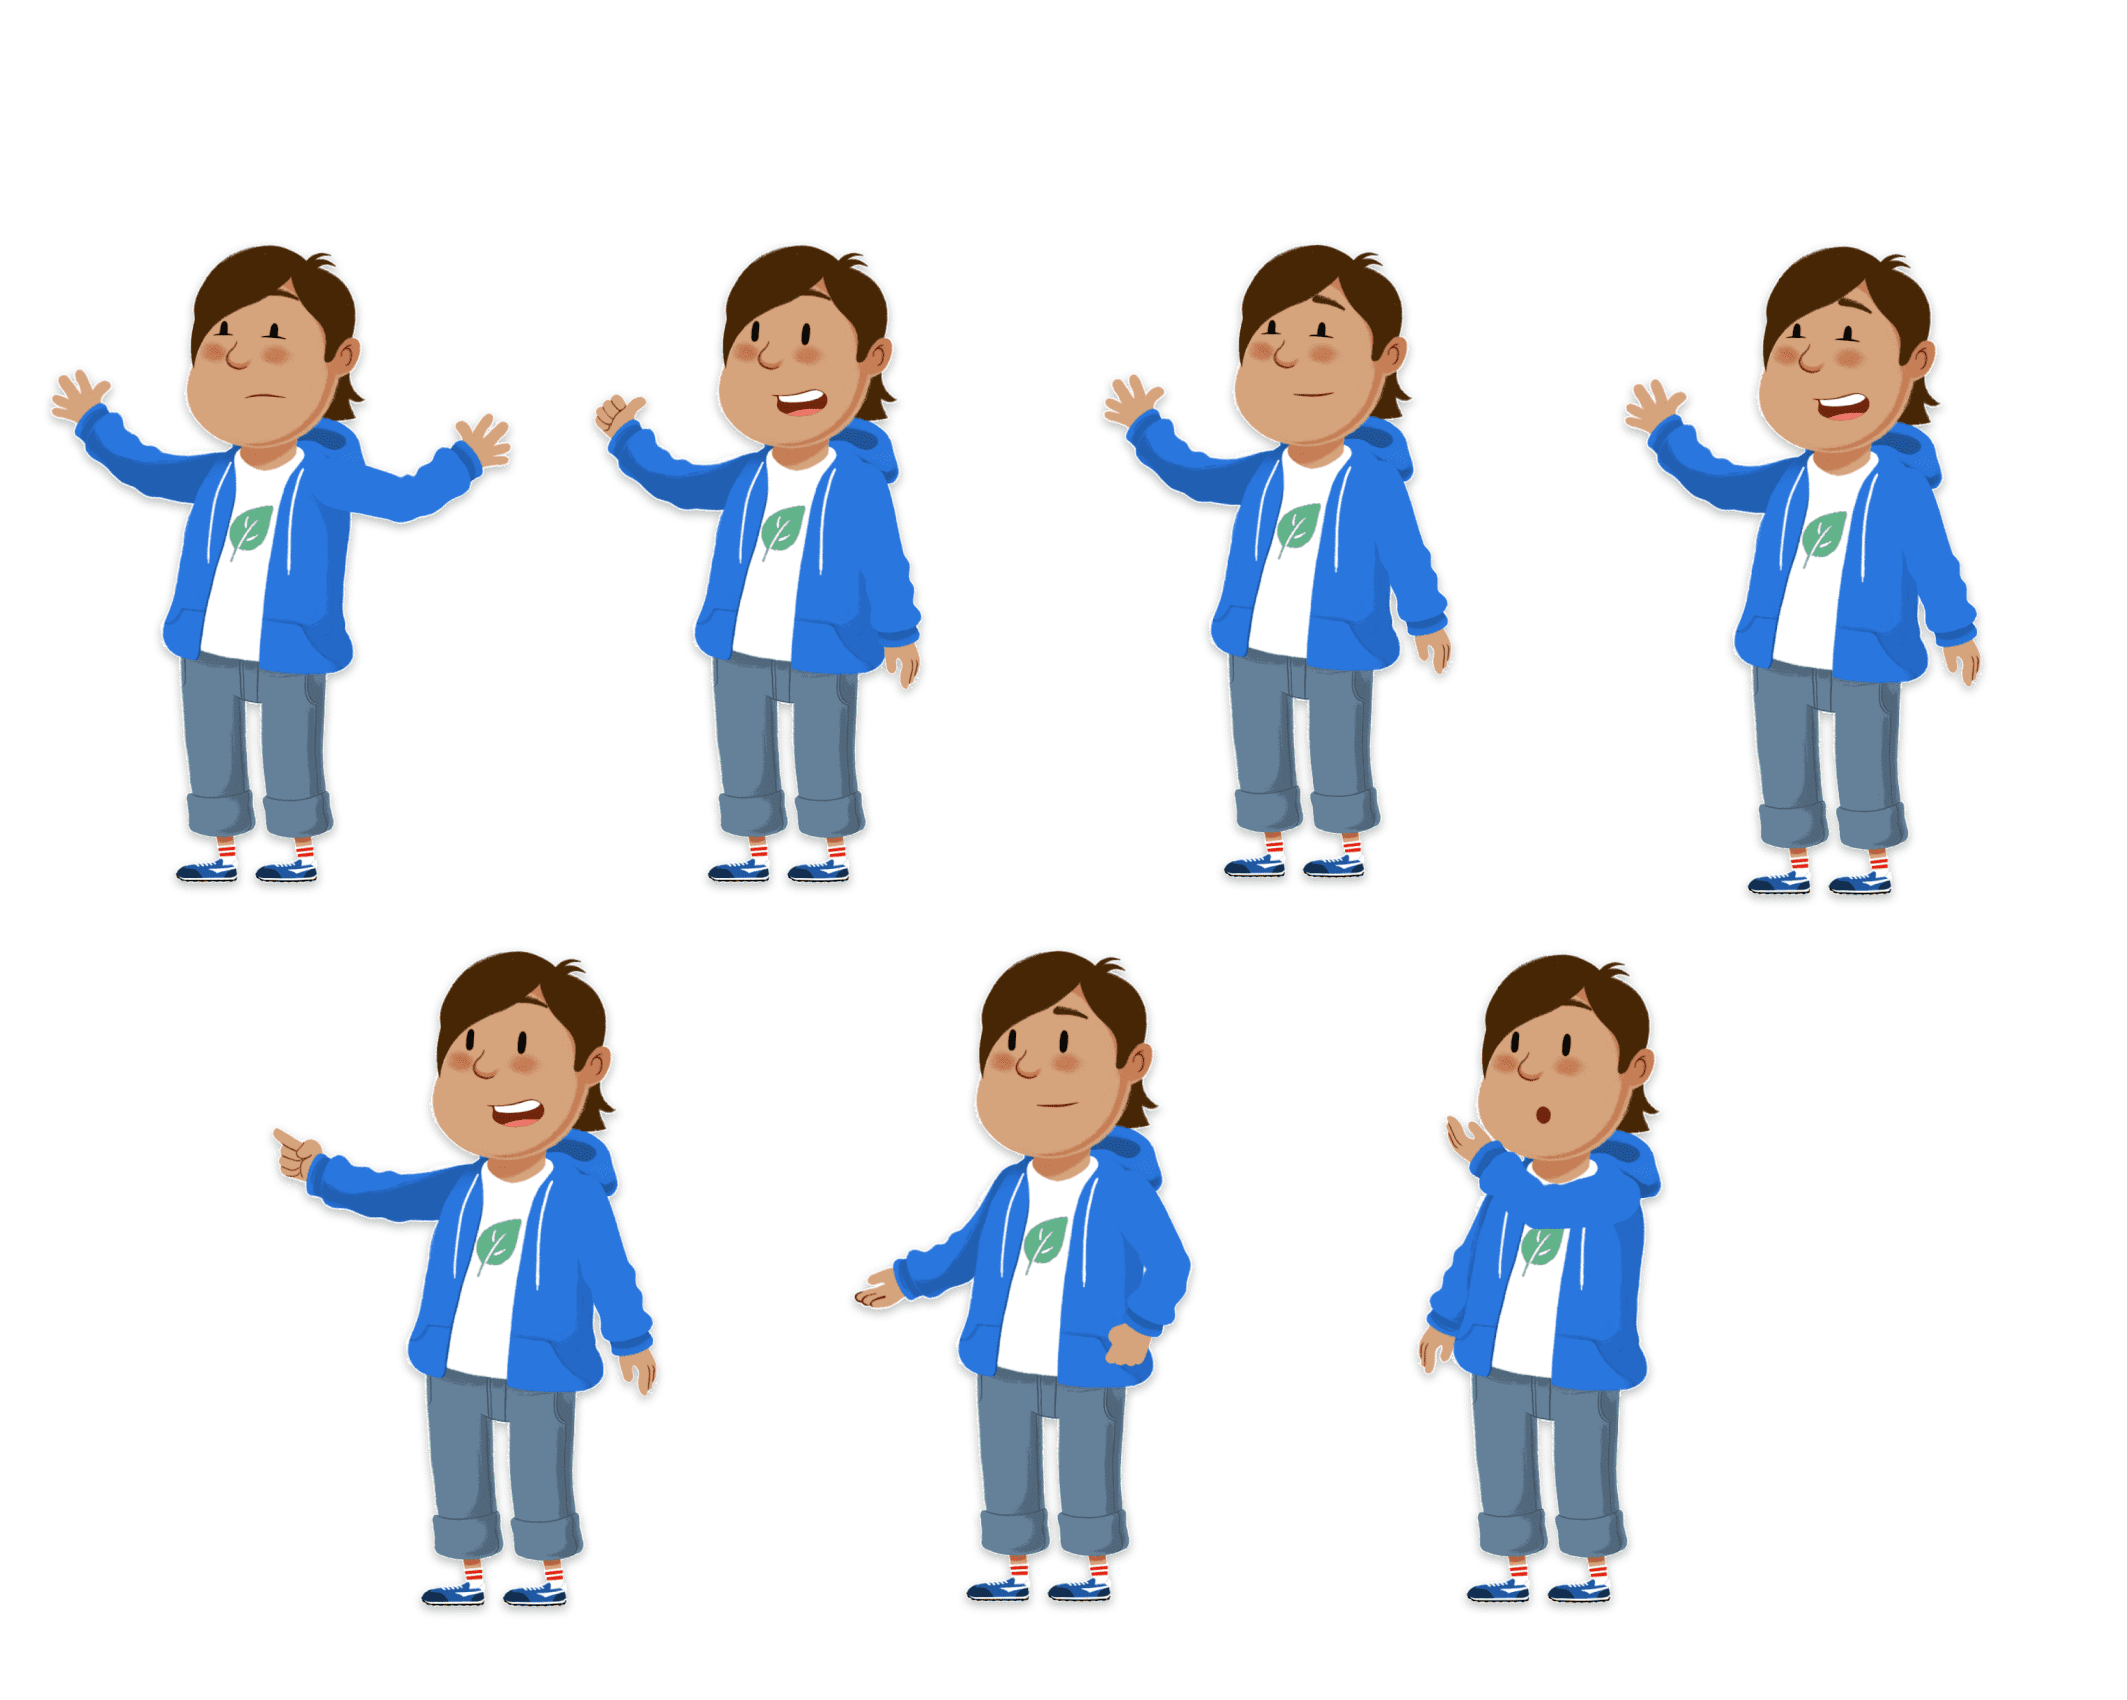 character illustration in different poses